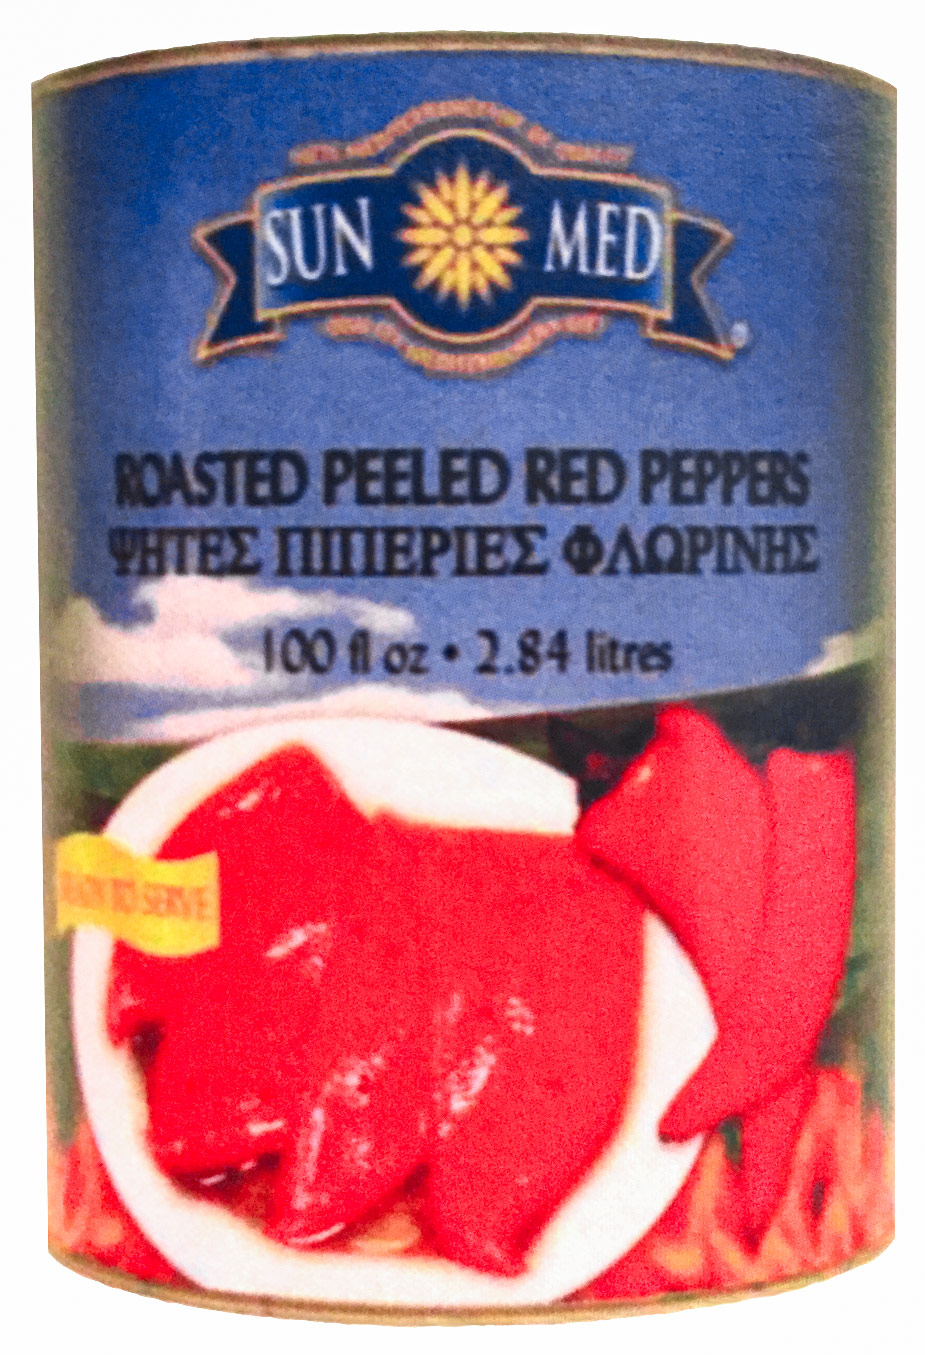 Roasted Peeled Red Peppers – 2.84L